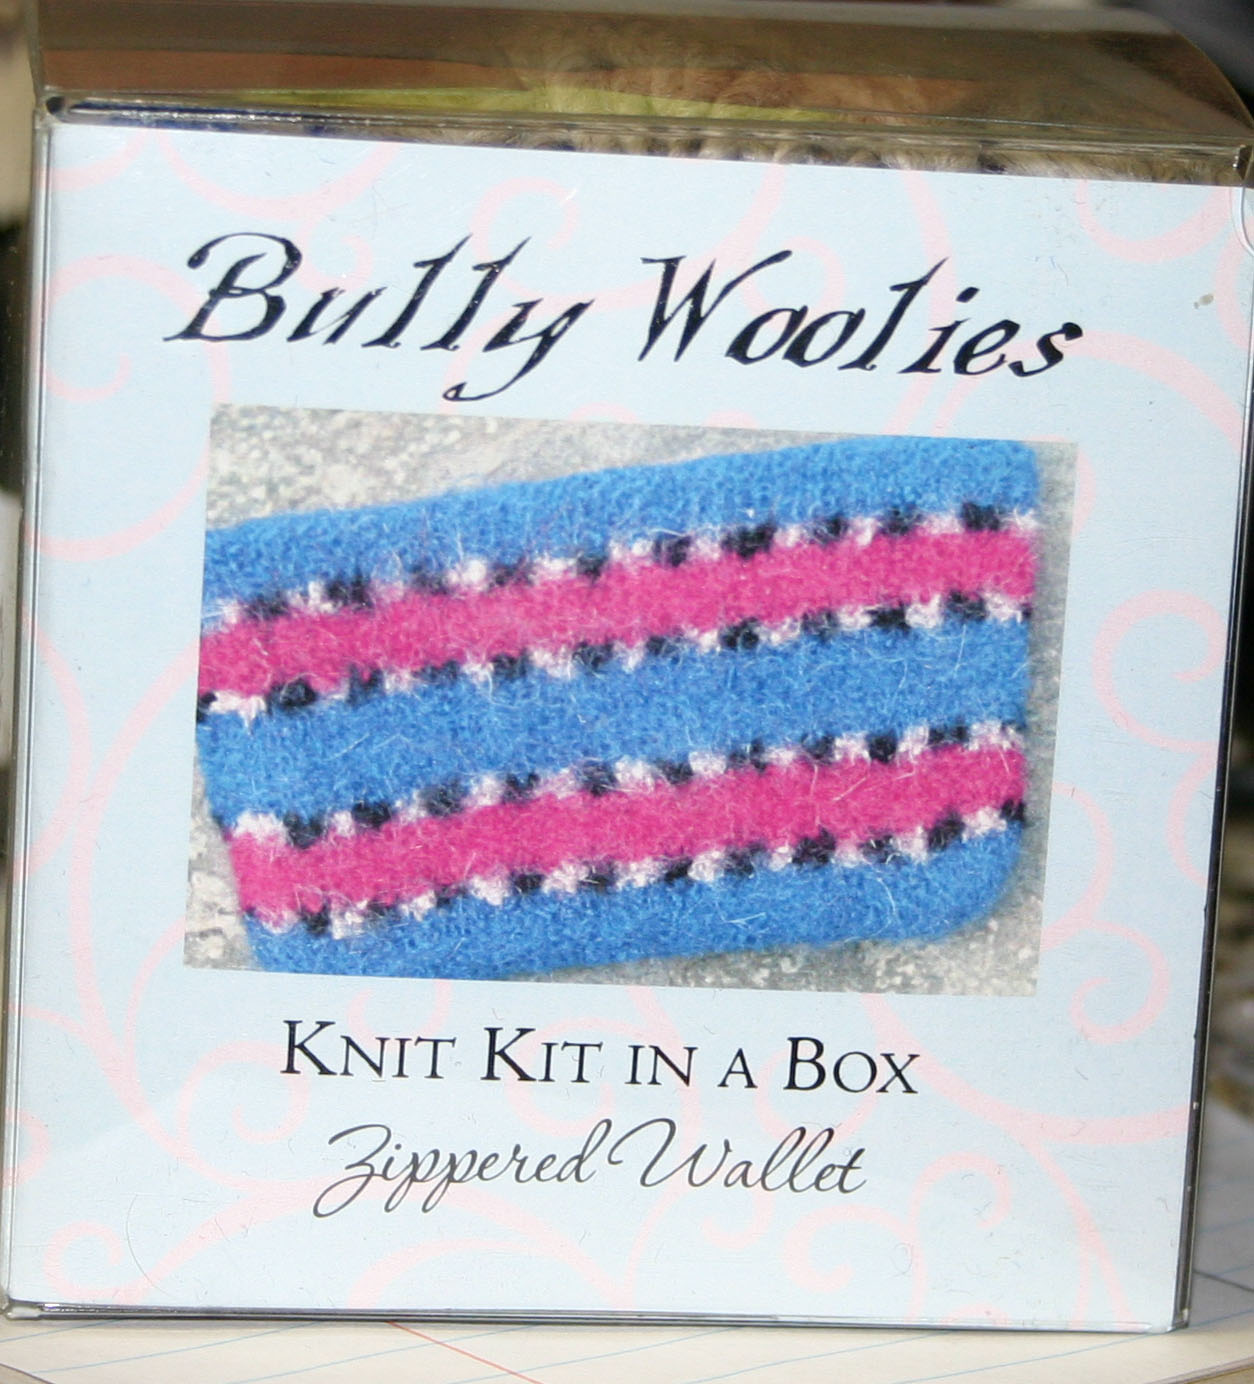 Bully Woolies Knit Kit in a Box - Notions Zippered Wallet